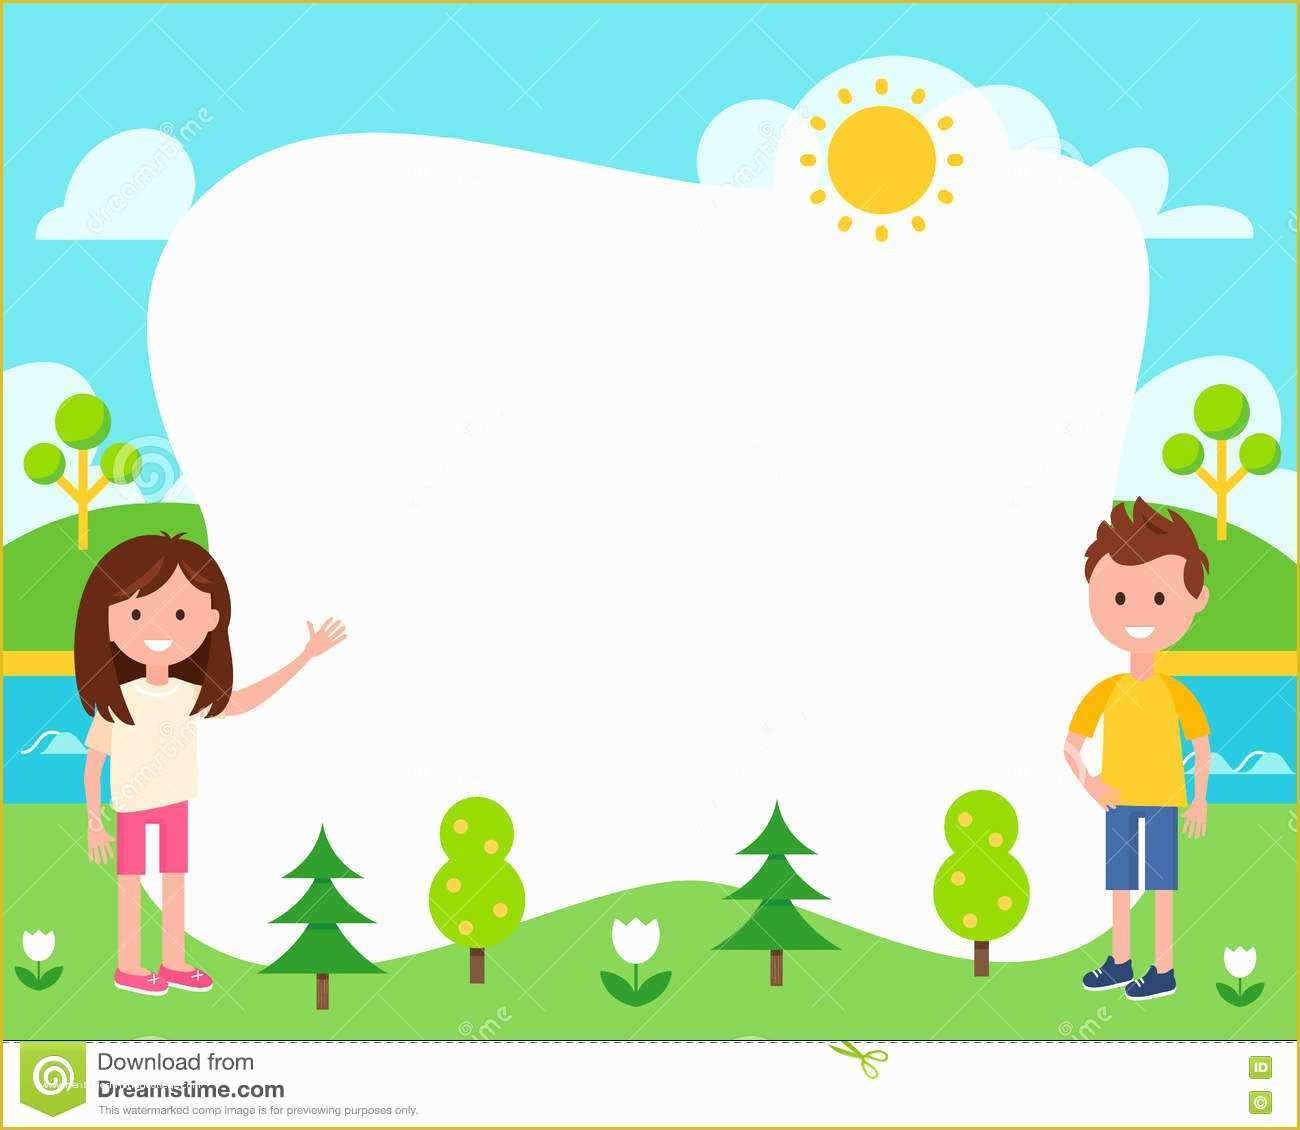 Free Child Care Powerpoint Templates Of Kids and Summer Landscape Poster Template Stock Vector